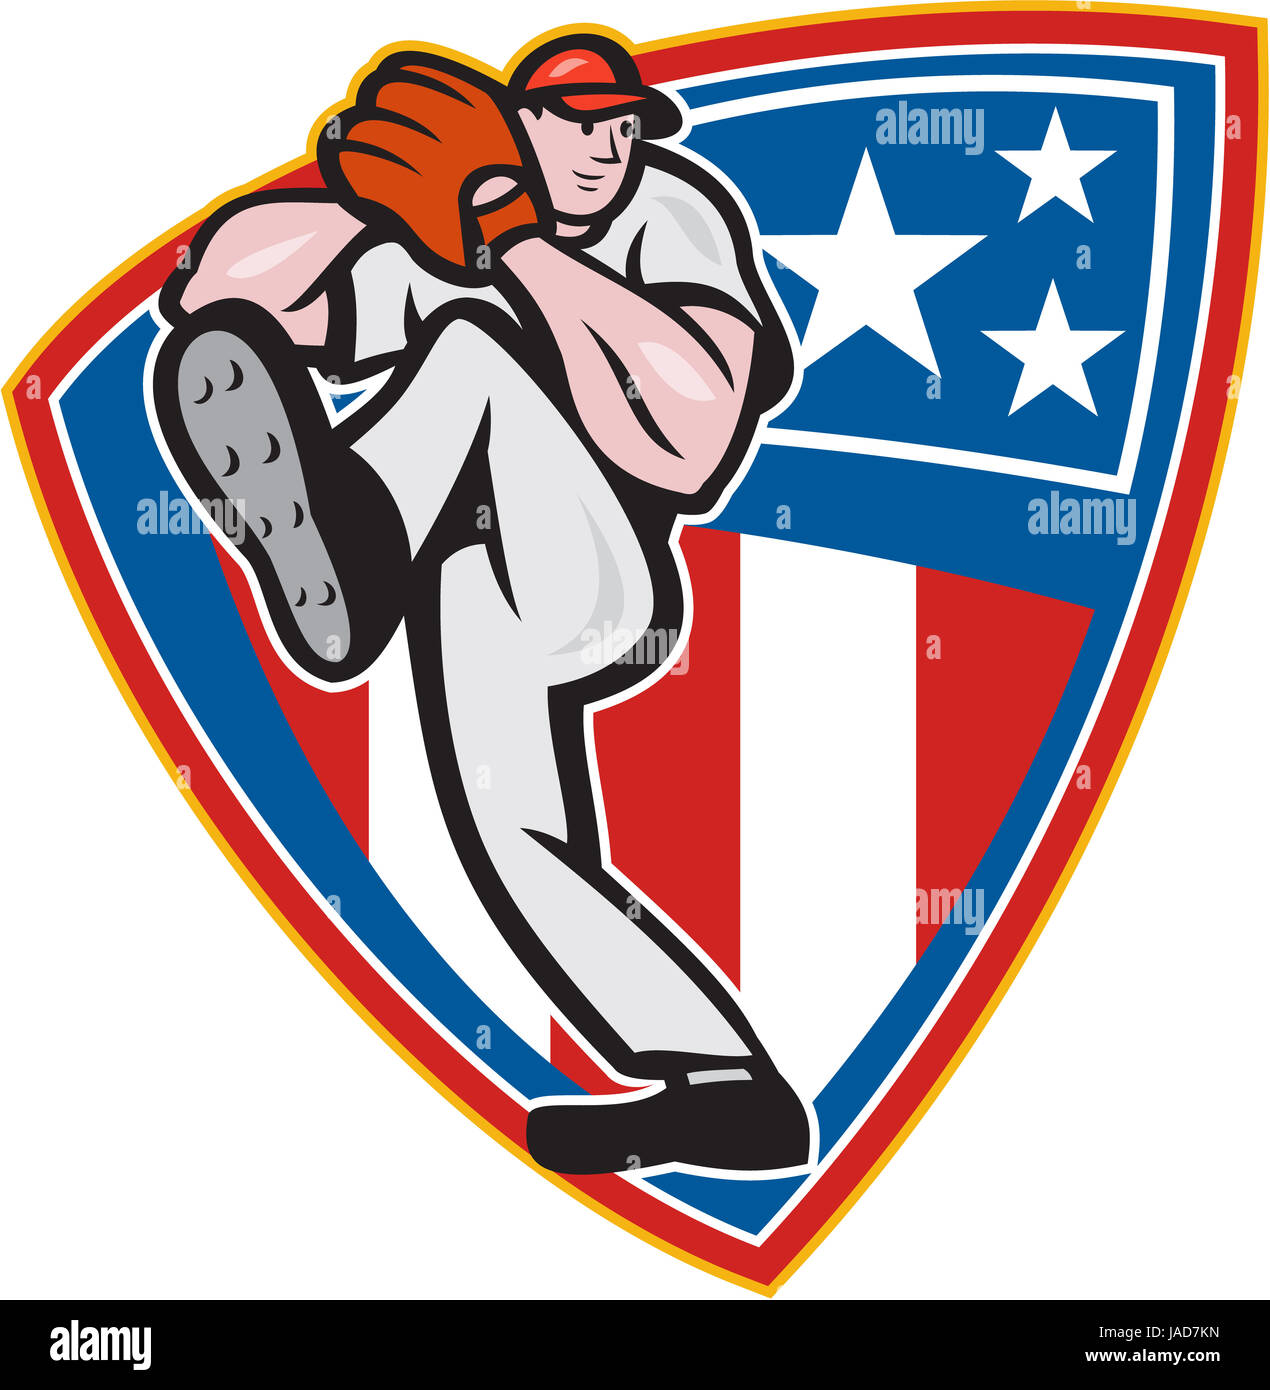 Illustration of a american baseball player pitcher outfilelder throwing ball set inside stars and stripes shield isolated on white background. Stock Photo